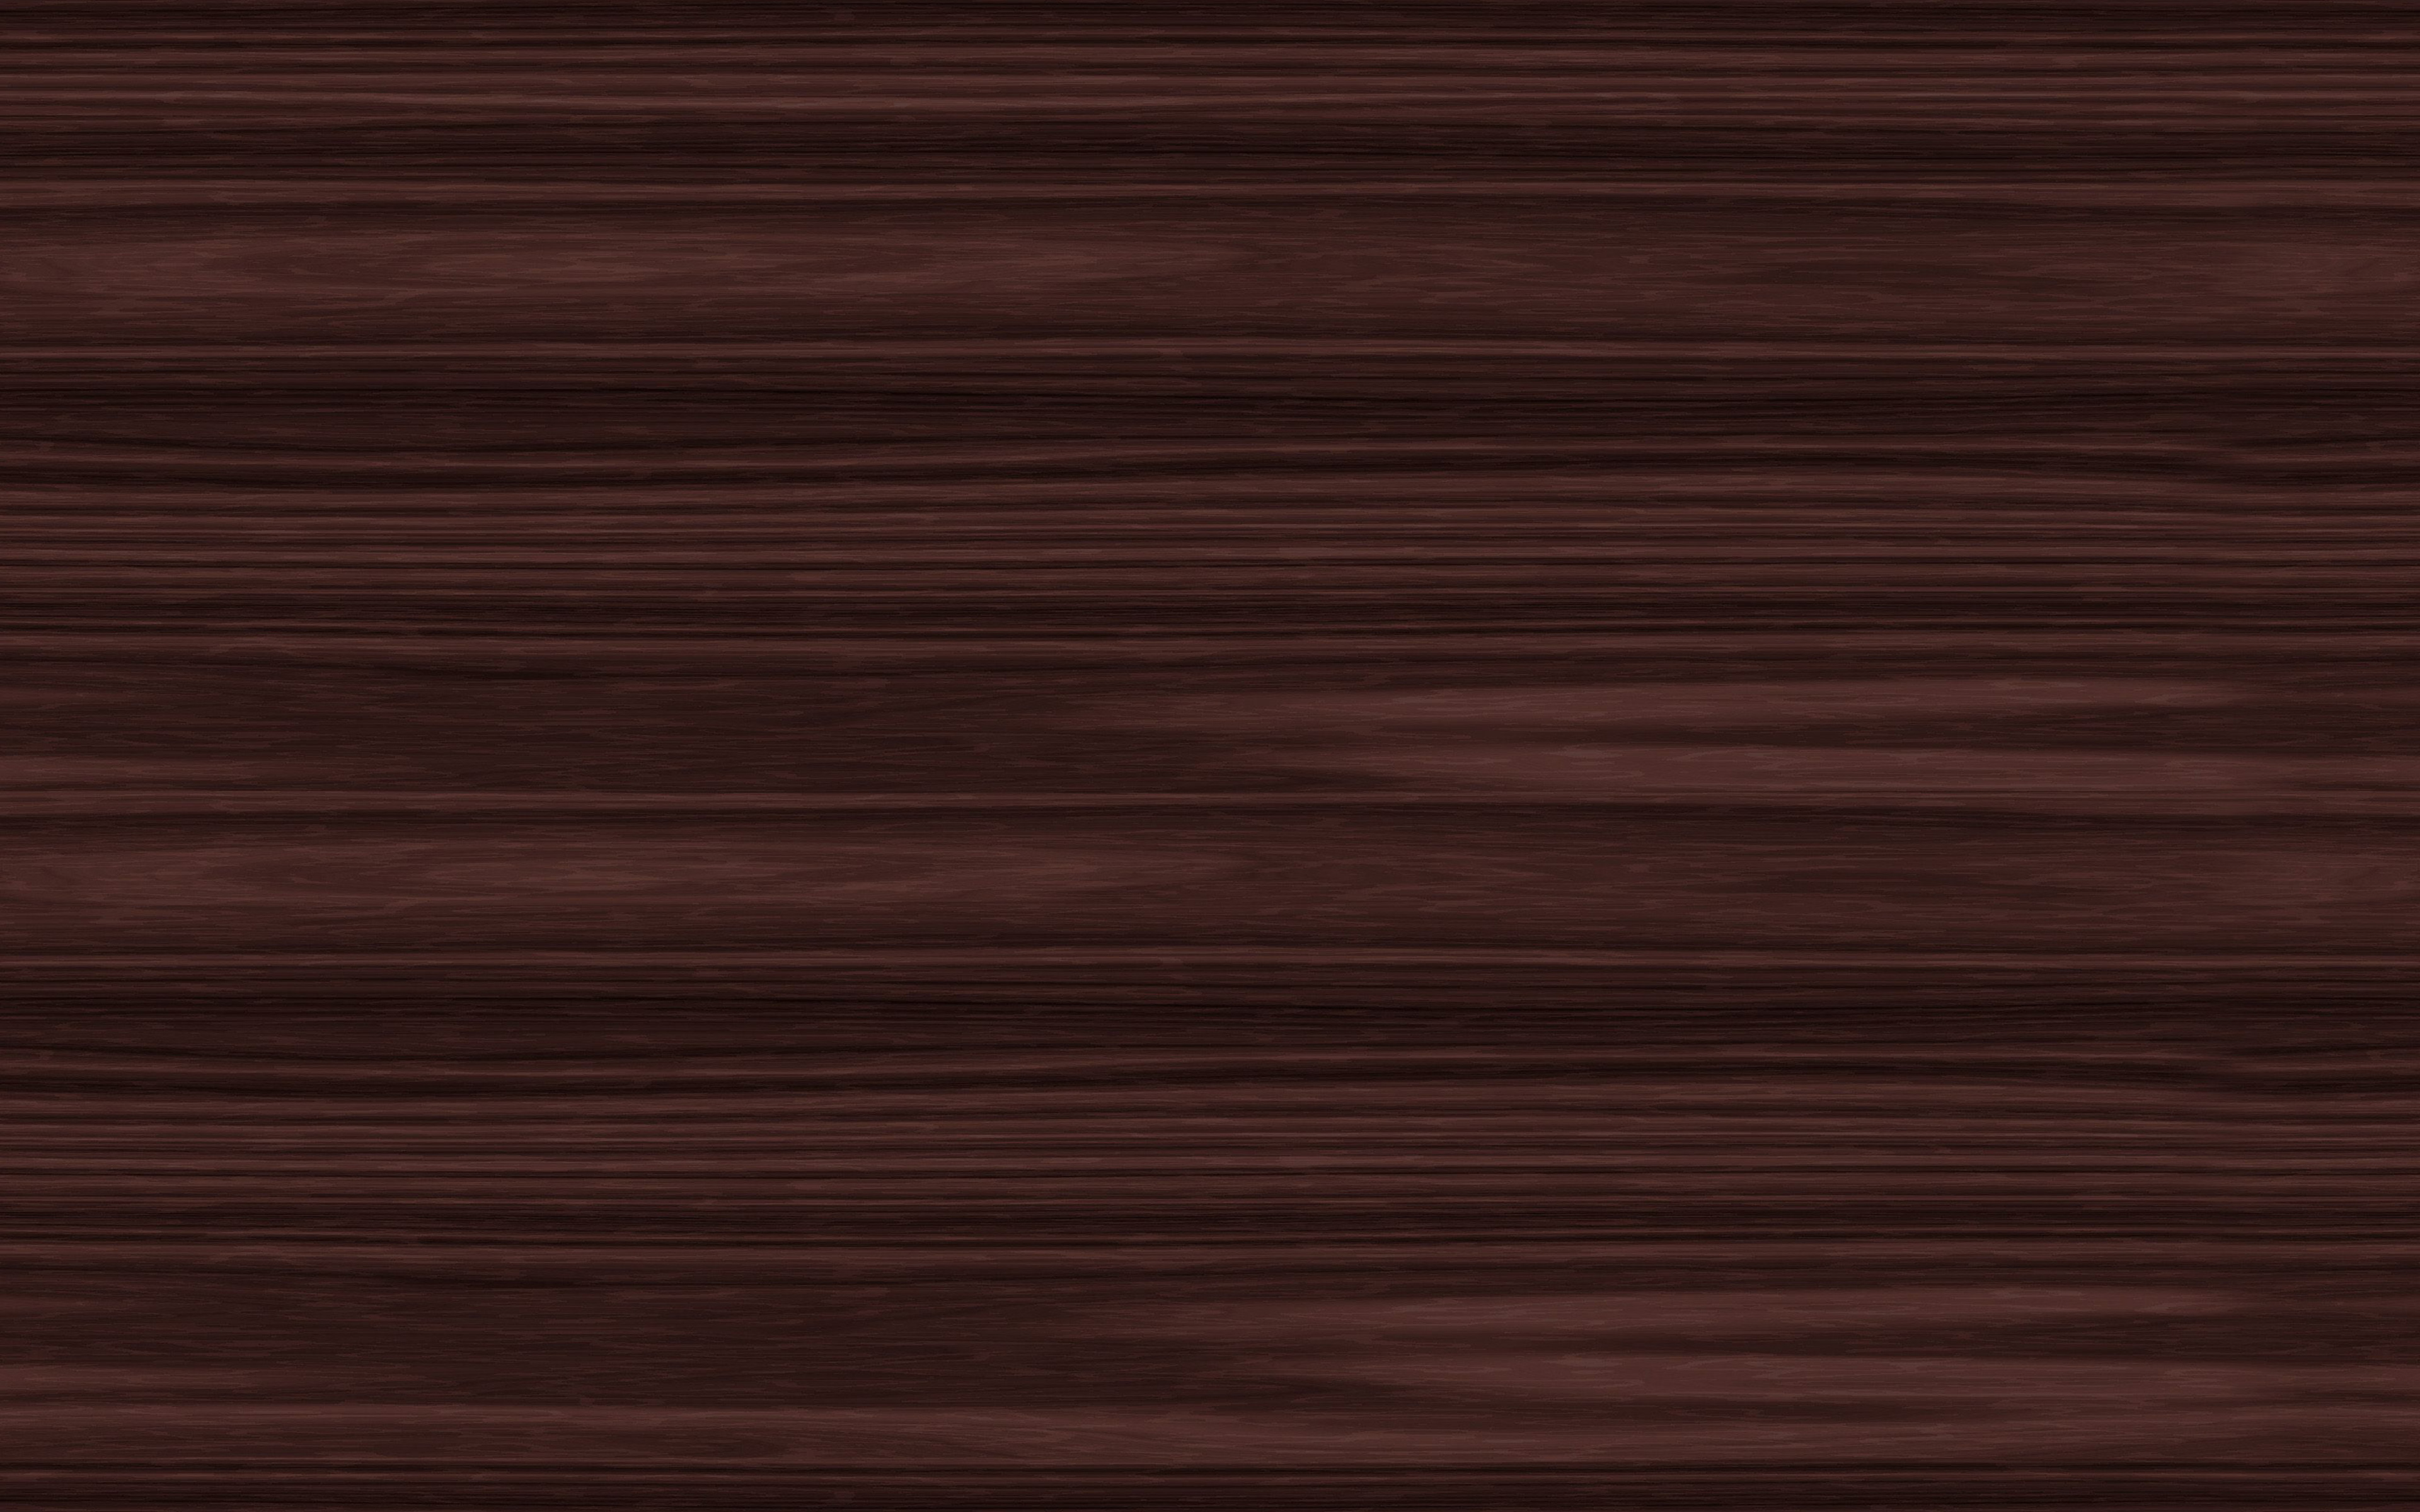 Download wallpapers dark brown wood texture, wood background, brown wood  background, horizontal lines on brown wooden background, brown wood floor  texture for desktop with resolution 3840x2400. High Quality HD pictures  wallpapers